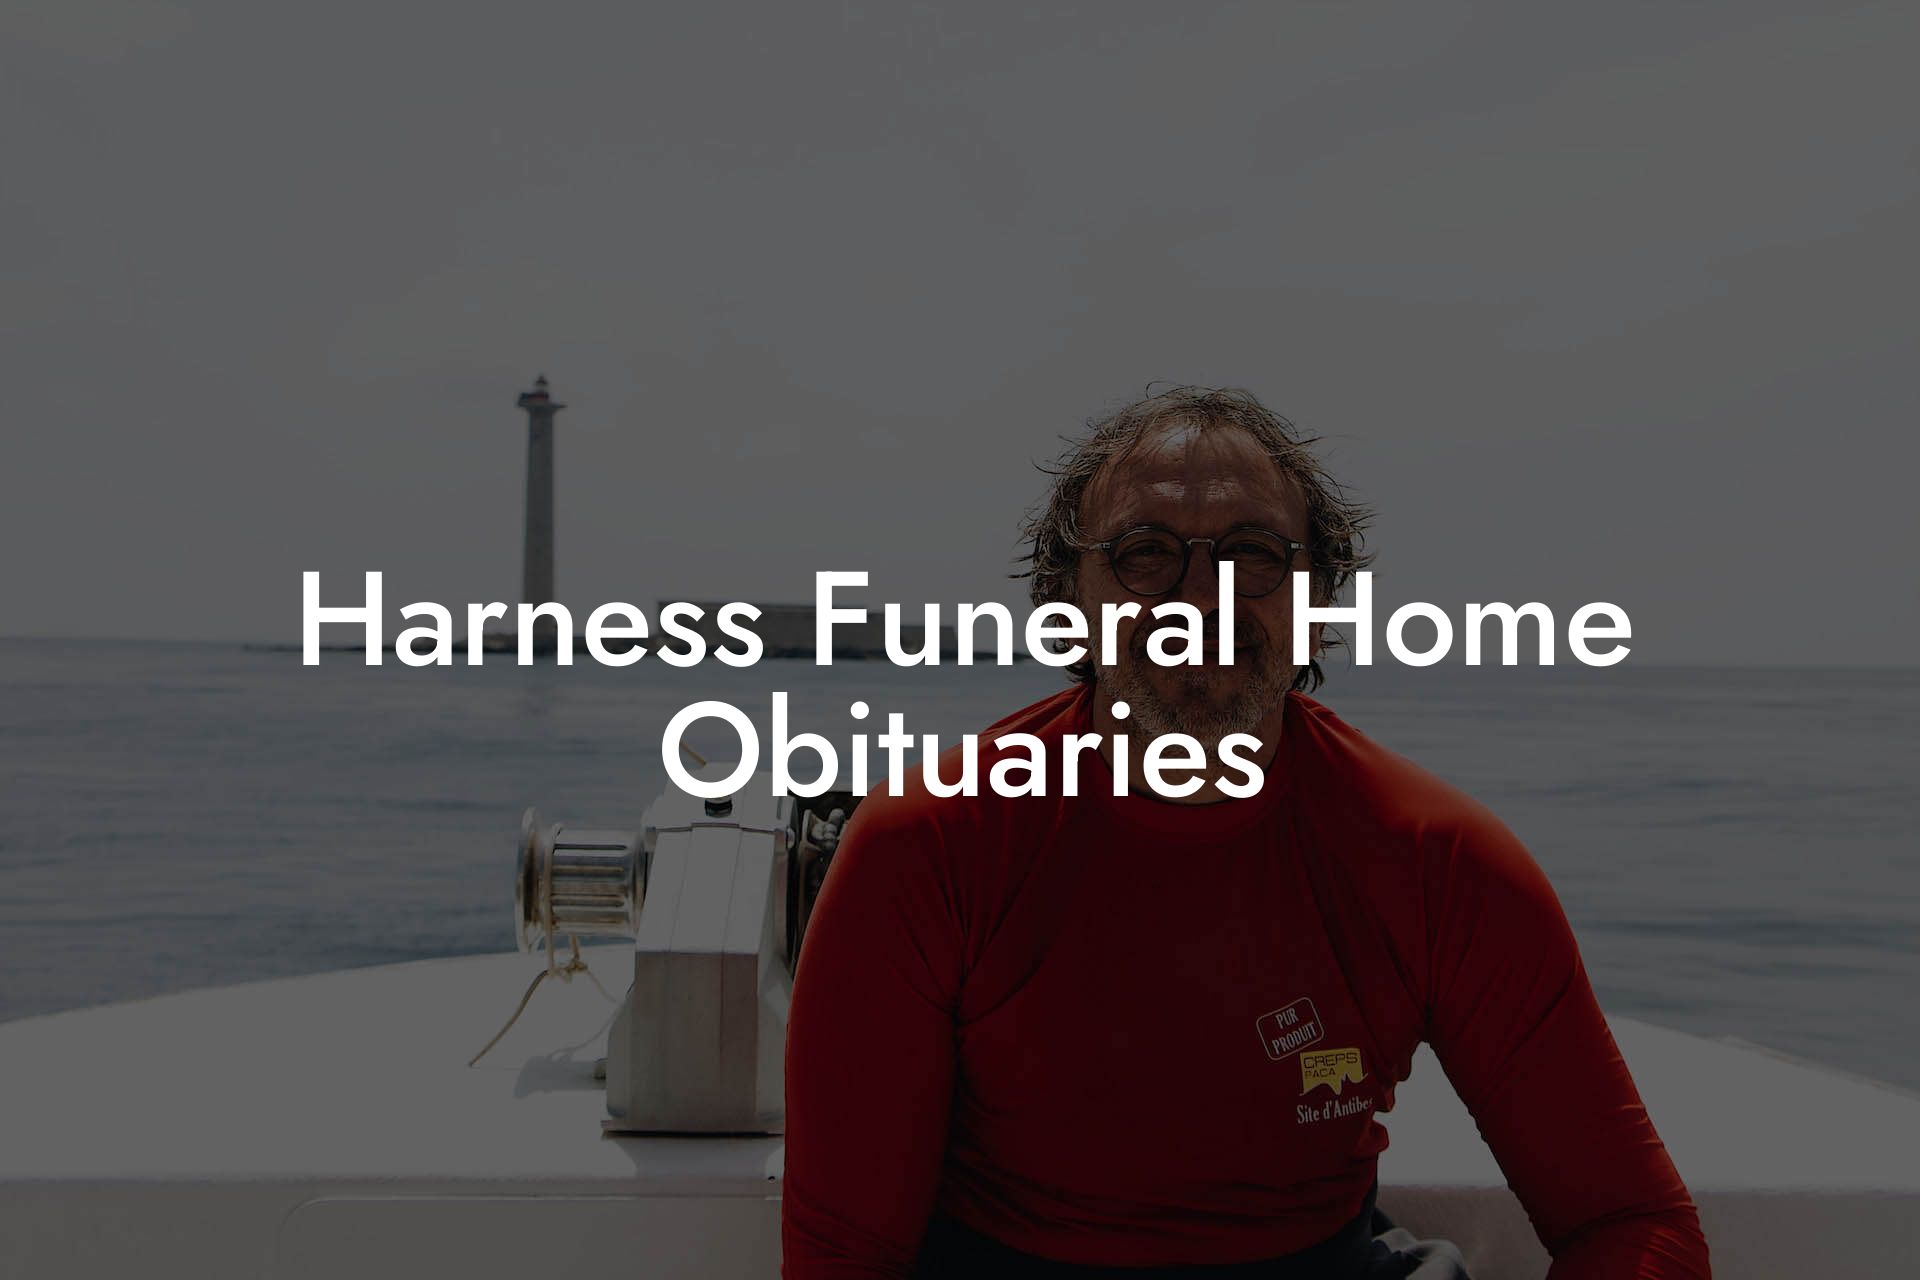 Harness Funeral Home Obituaries